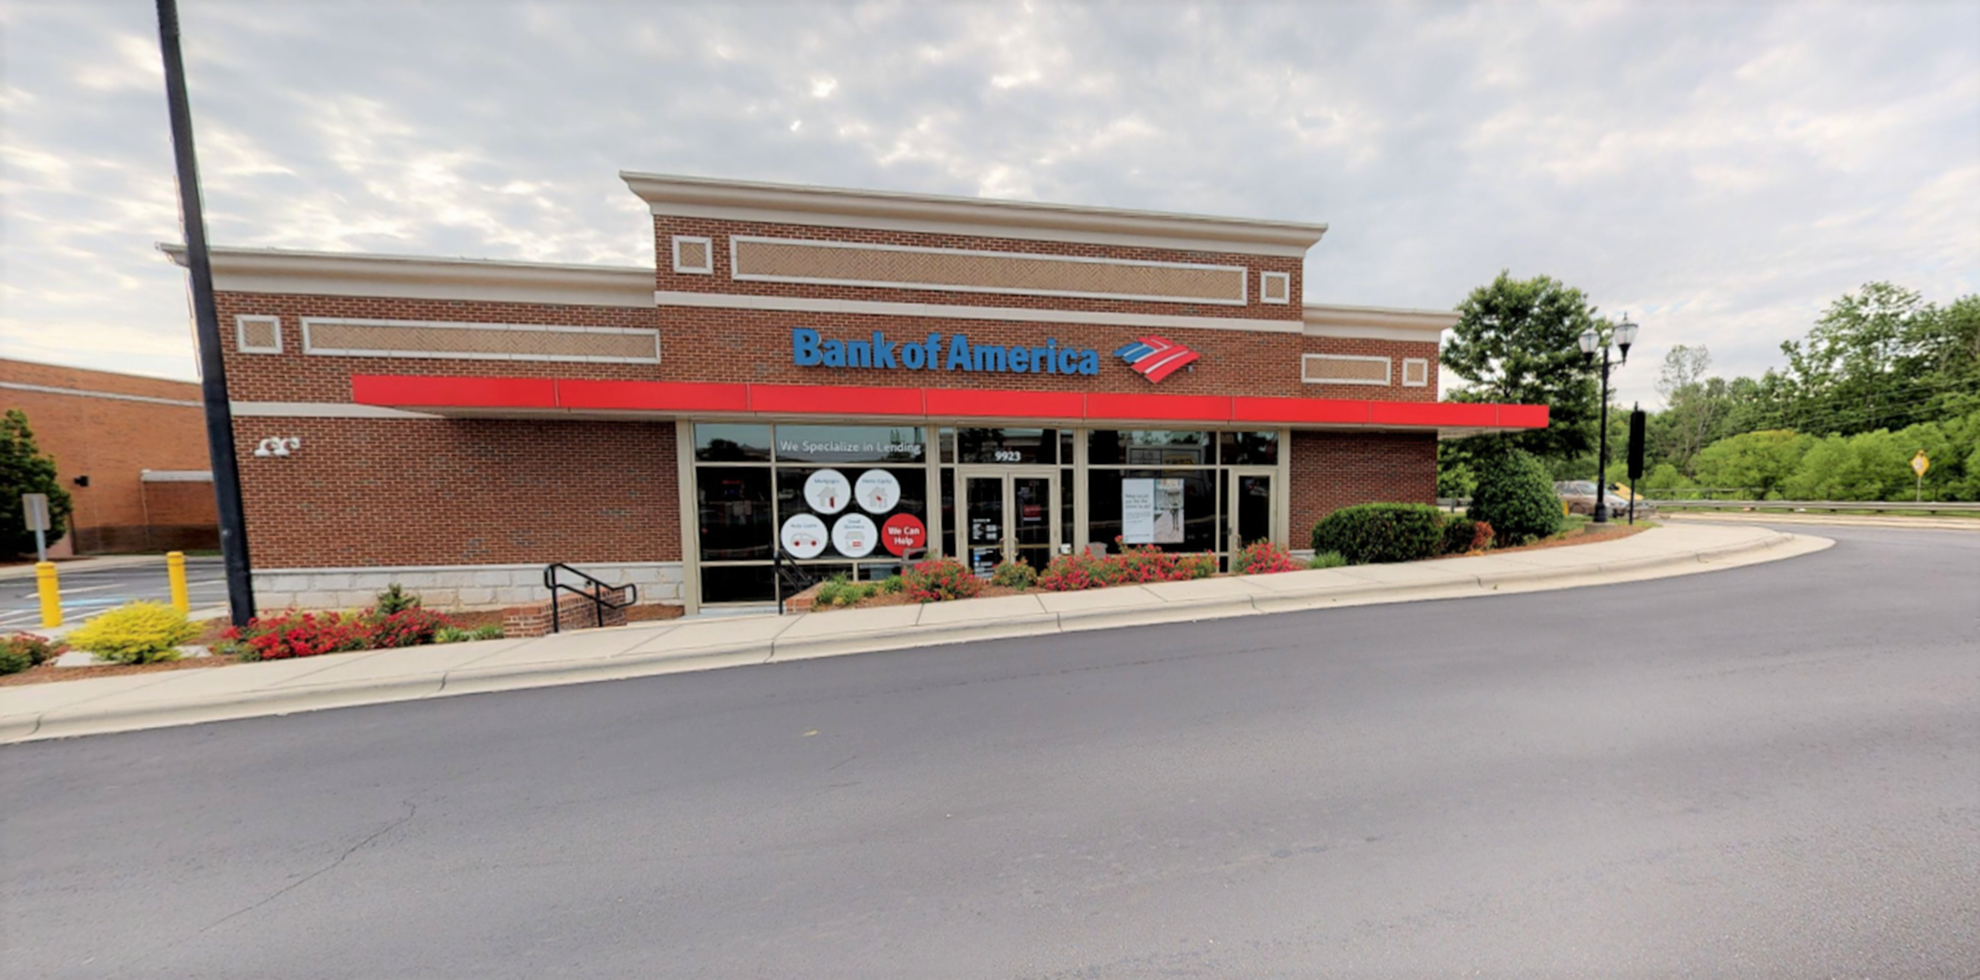 Bank of America financial center with drive-thru ATM | 9923 Rea Rd, Charlotte, NC 28277